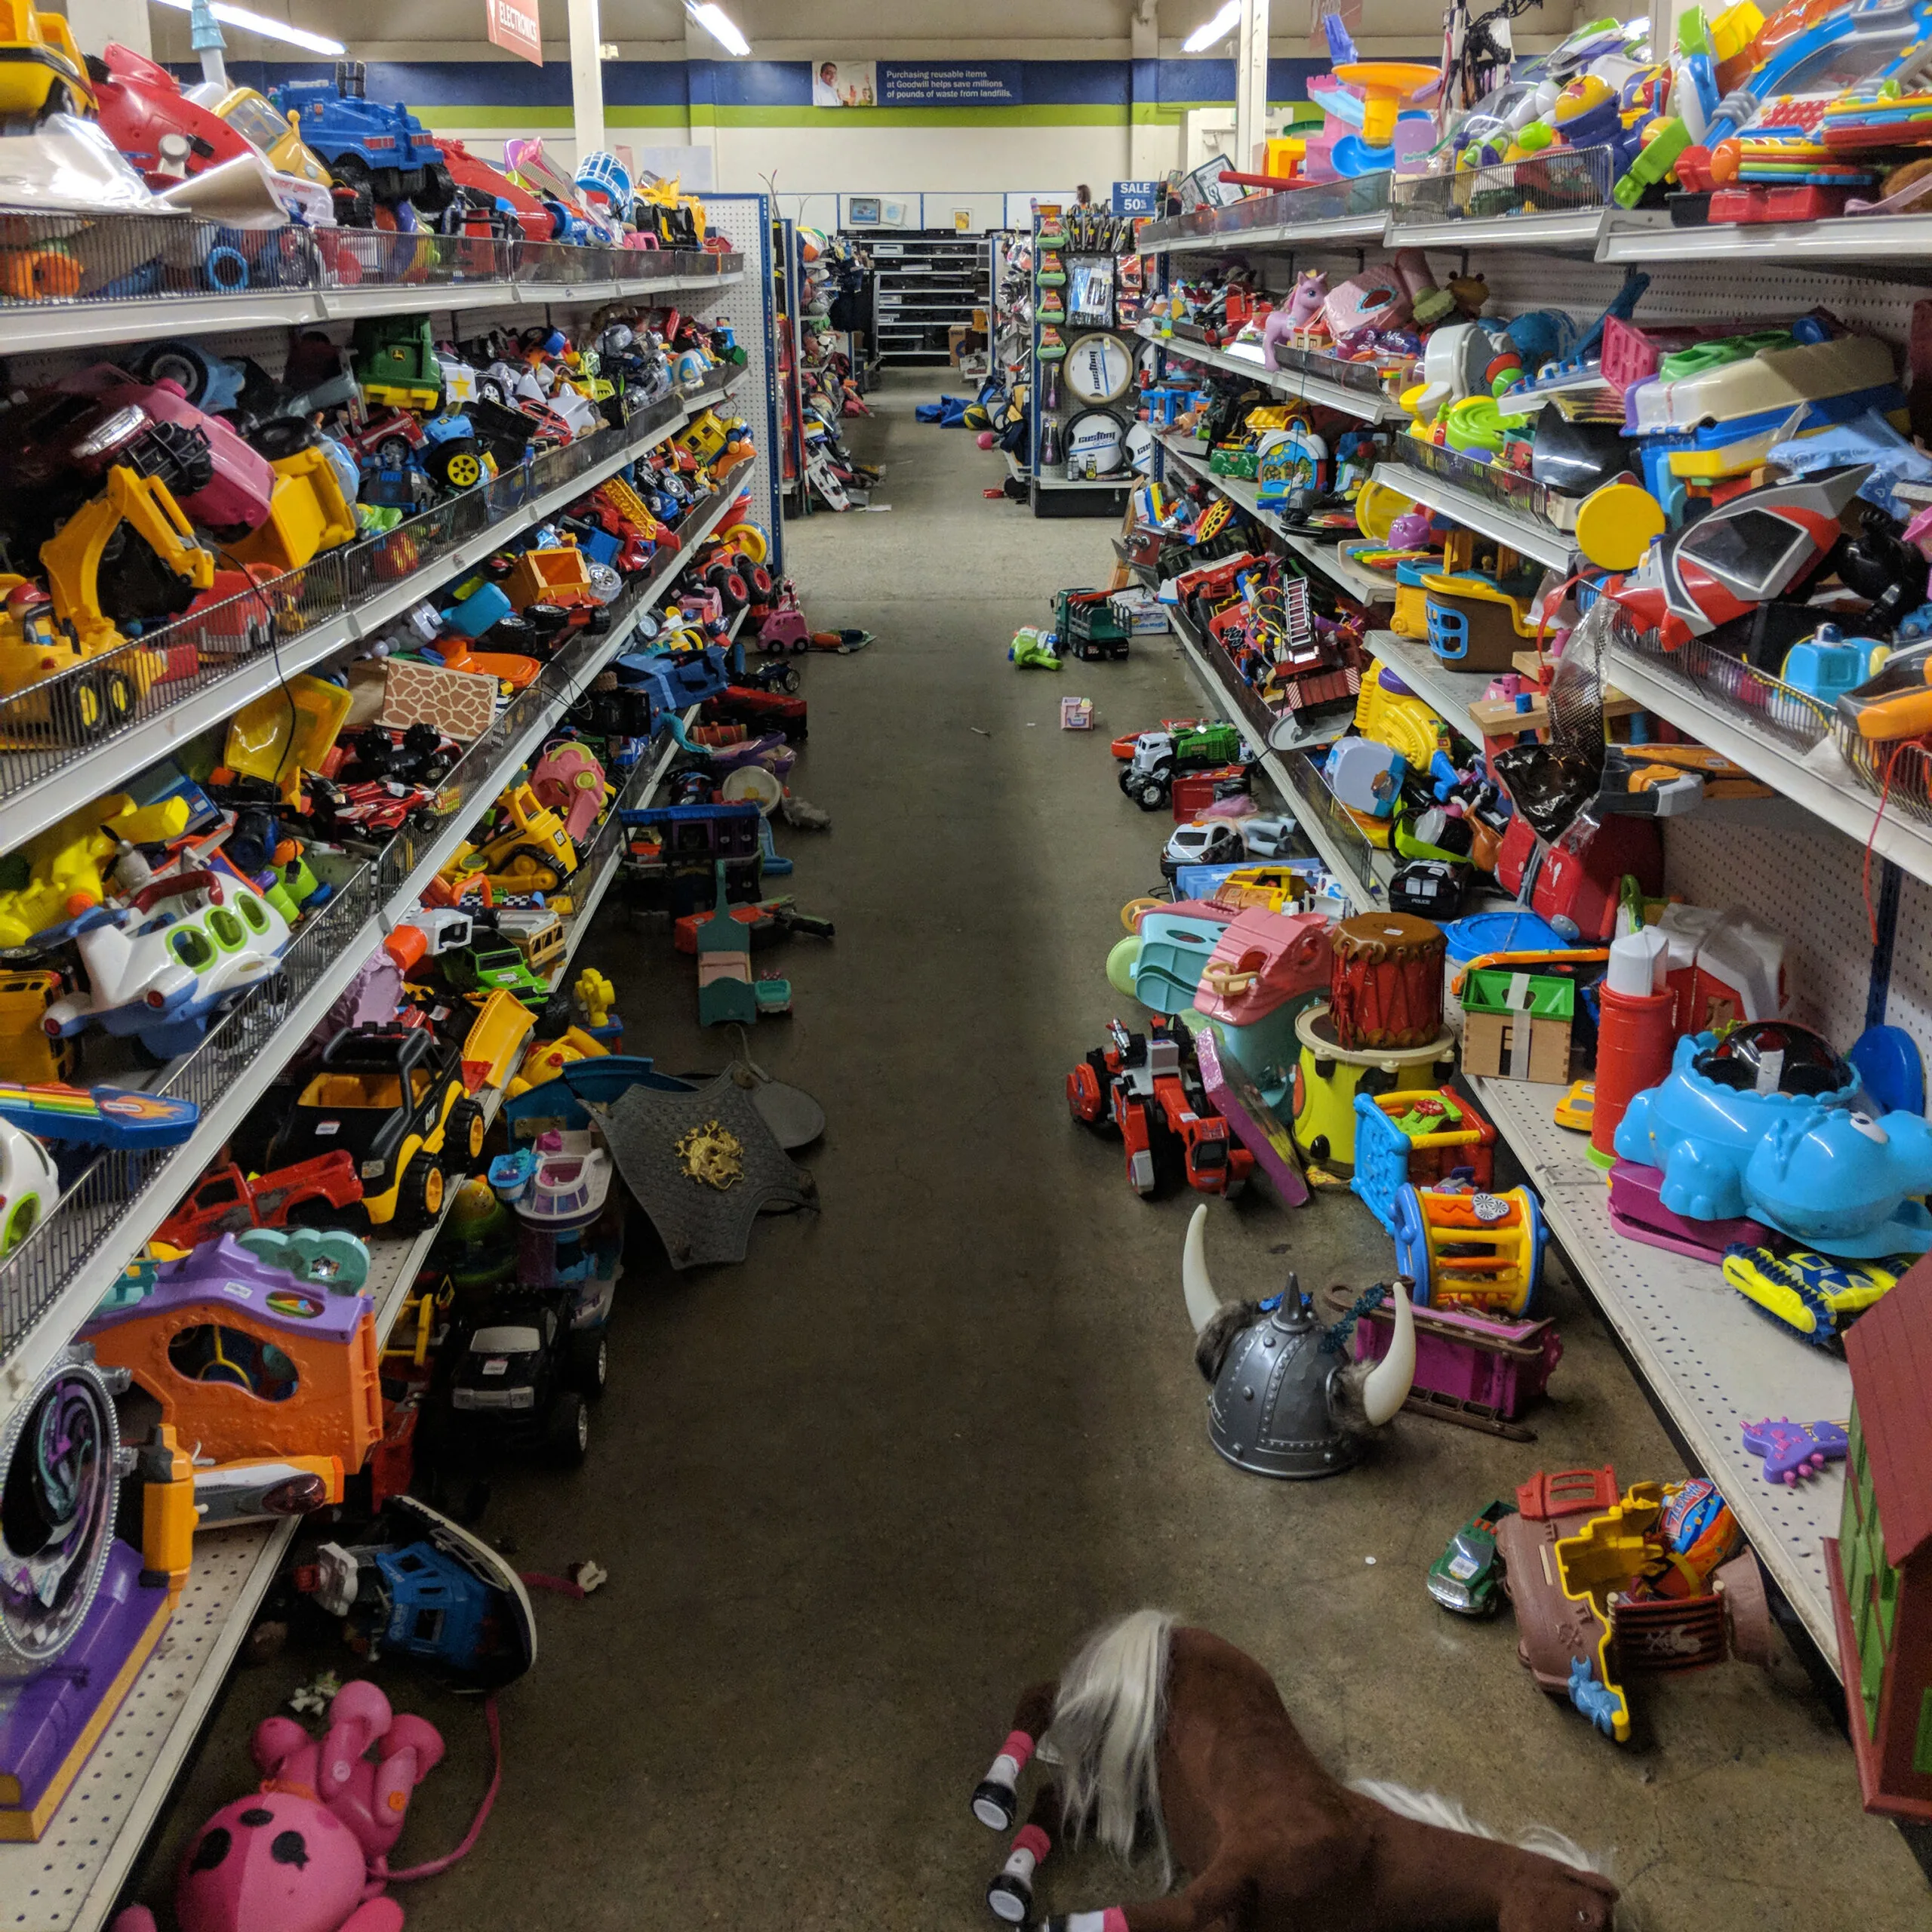 The toy aisle at a large Seattle thrift store